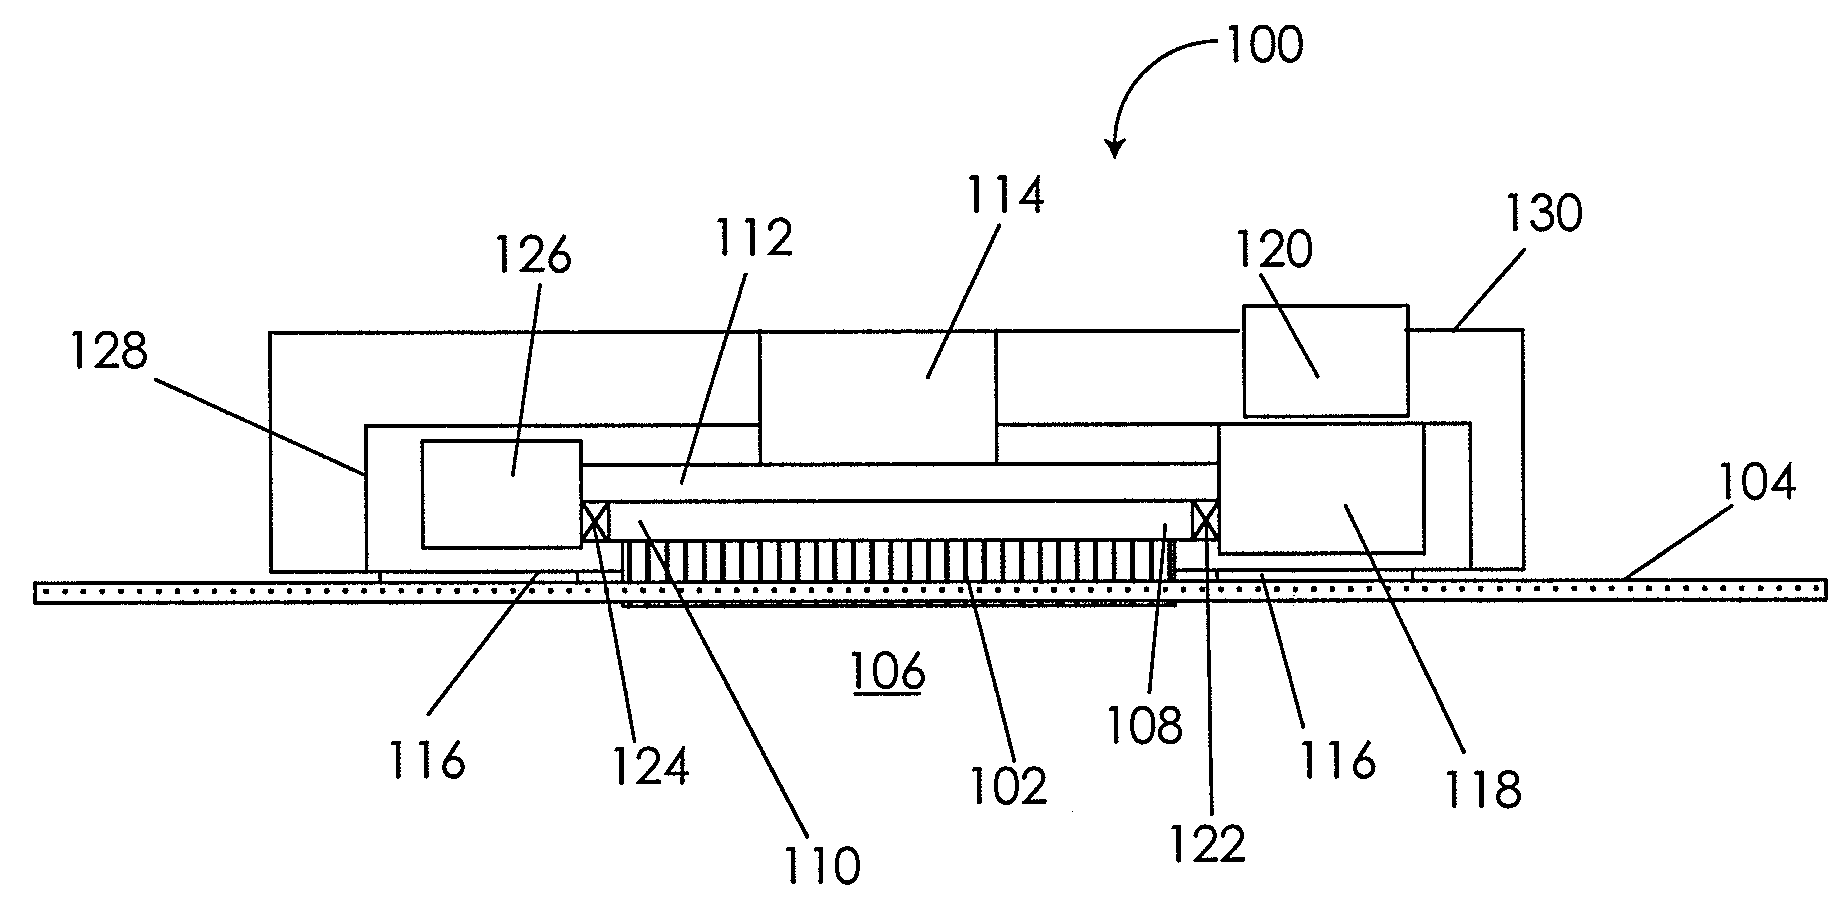 Devices, systems, methods and tools for continuous glucose monitoring